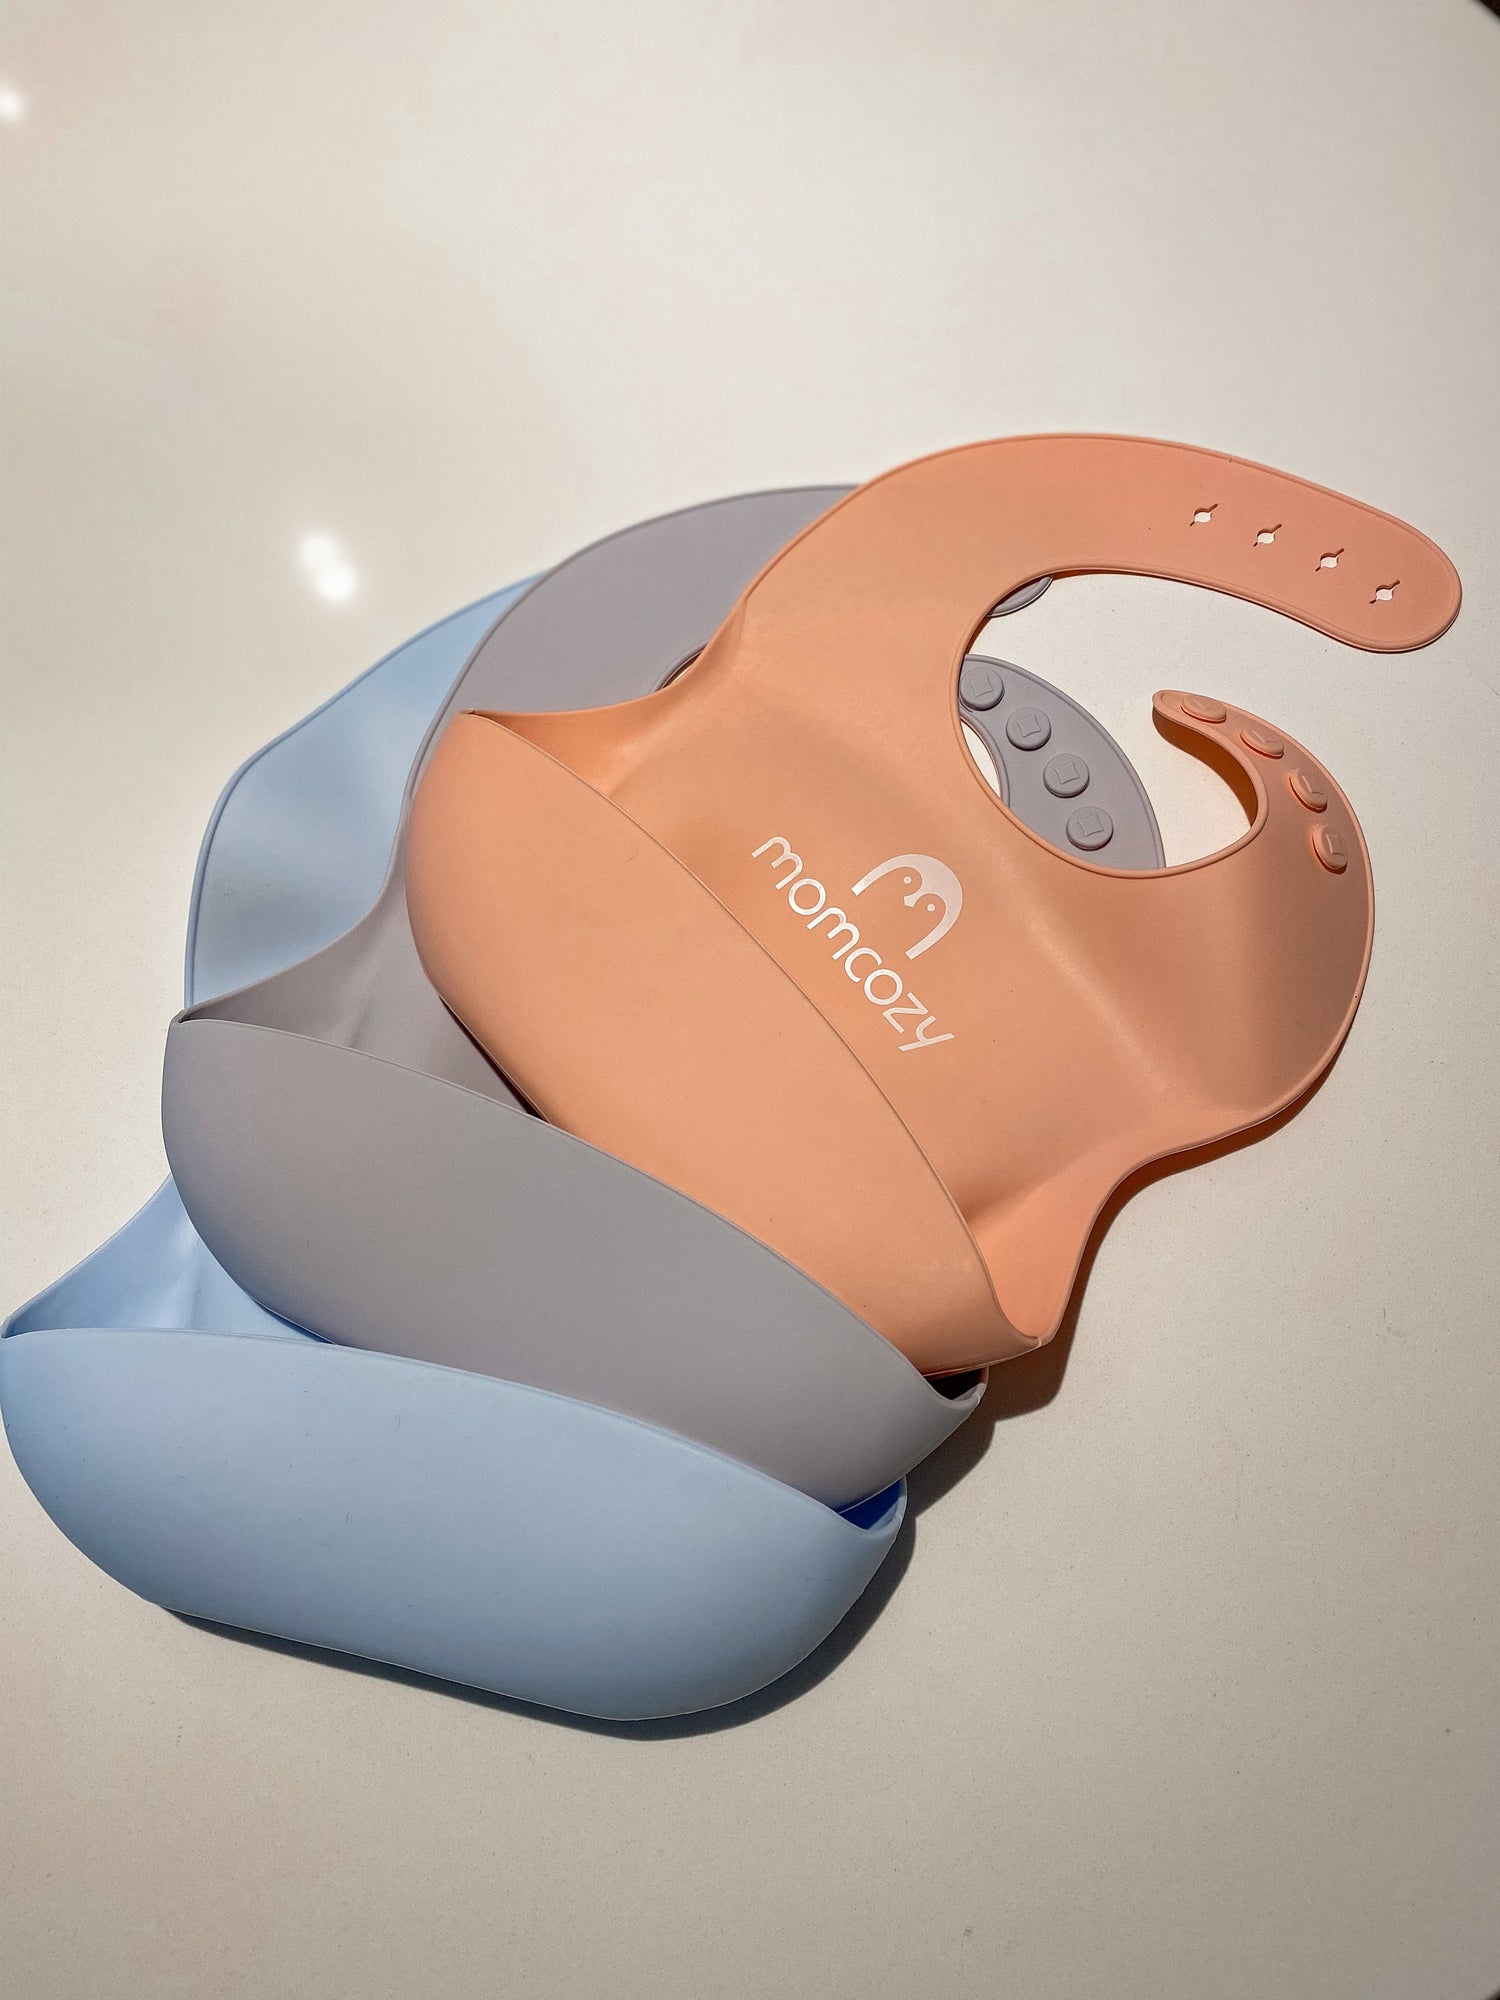 How To Choose The Best Baby Bib For Your Child